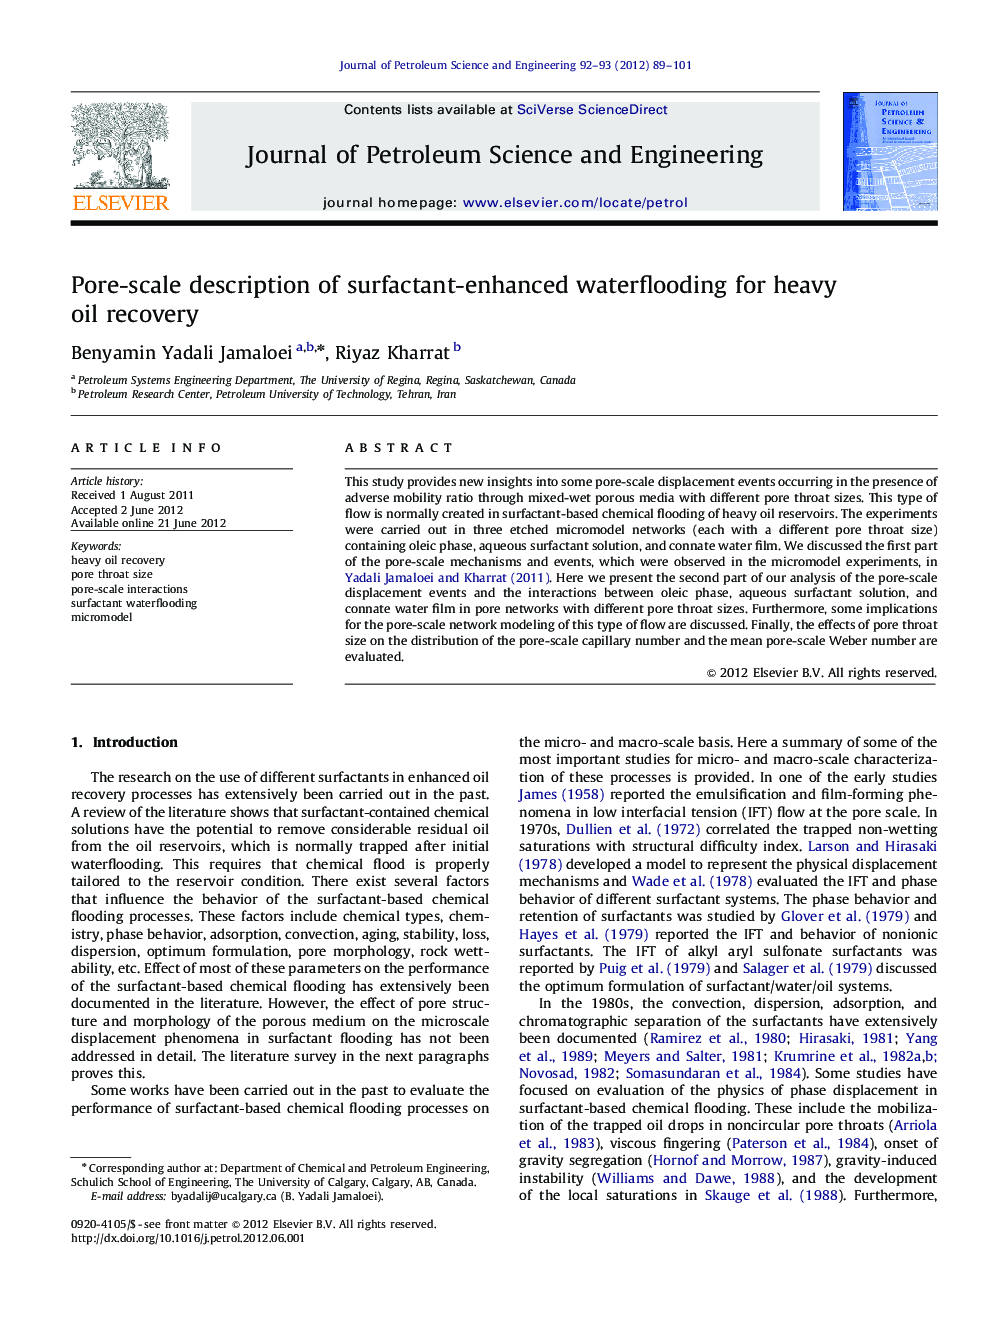 Pore-scale description of surfactant-enhanced waterflooding for heavy oil recovery